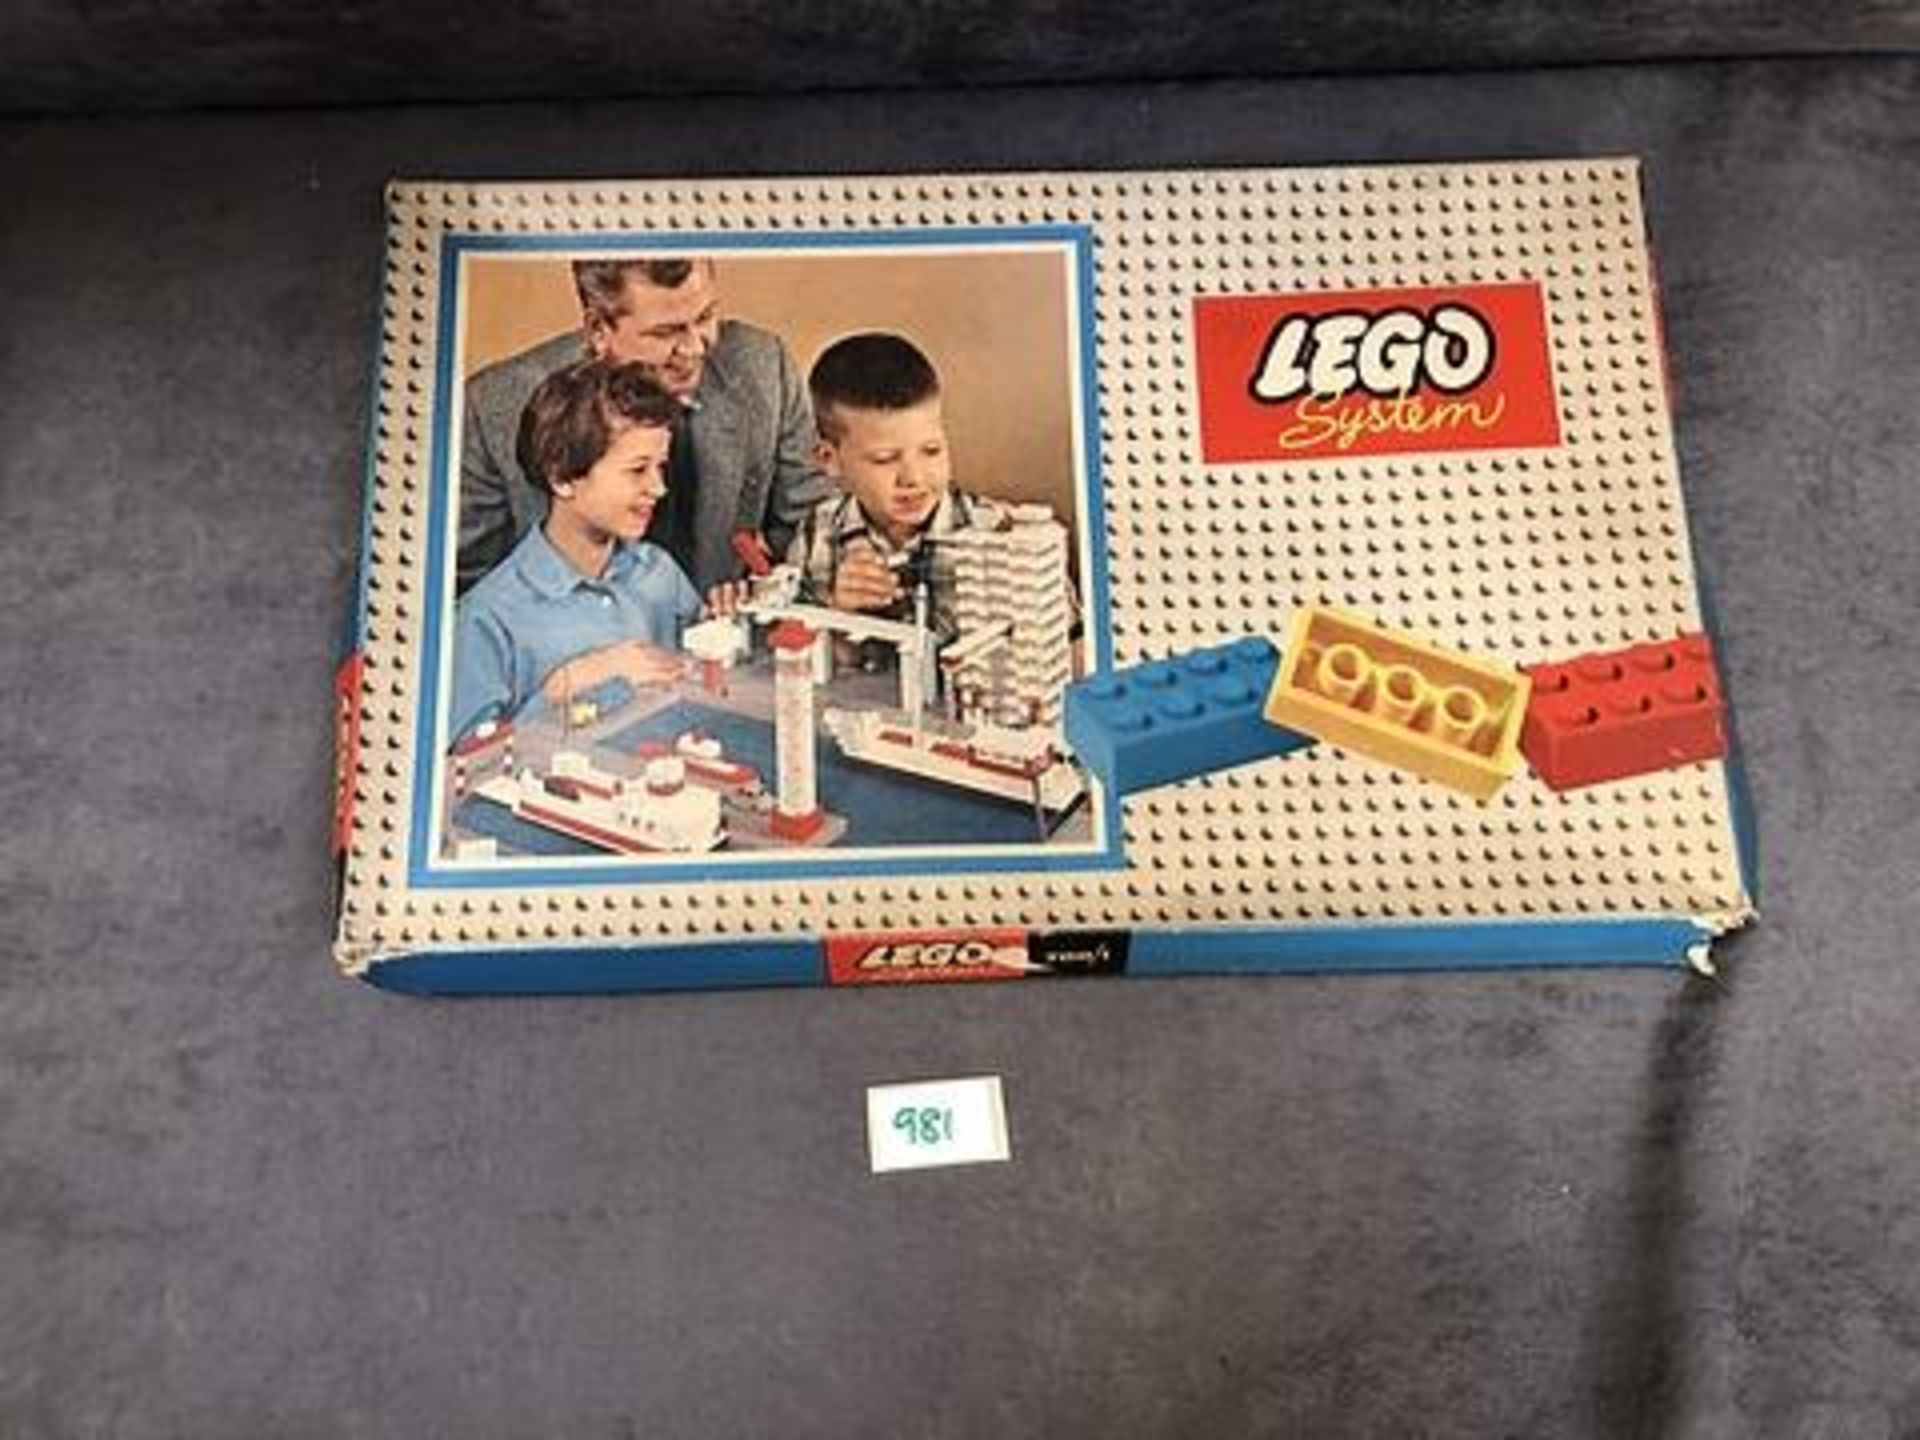 Lego Systems 700/1 The First Basic LEGO Sets Produced From 1960-65 Complete With Box